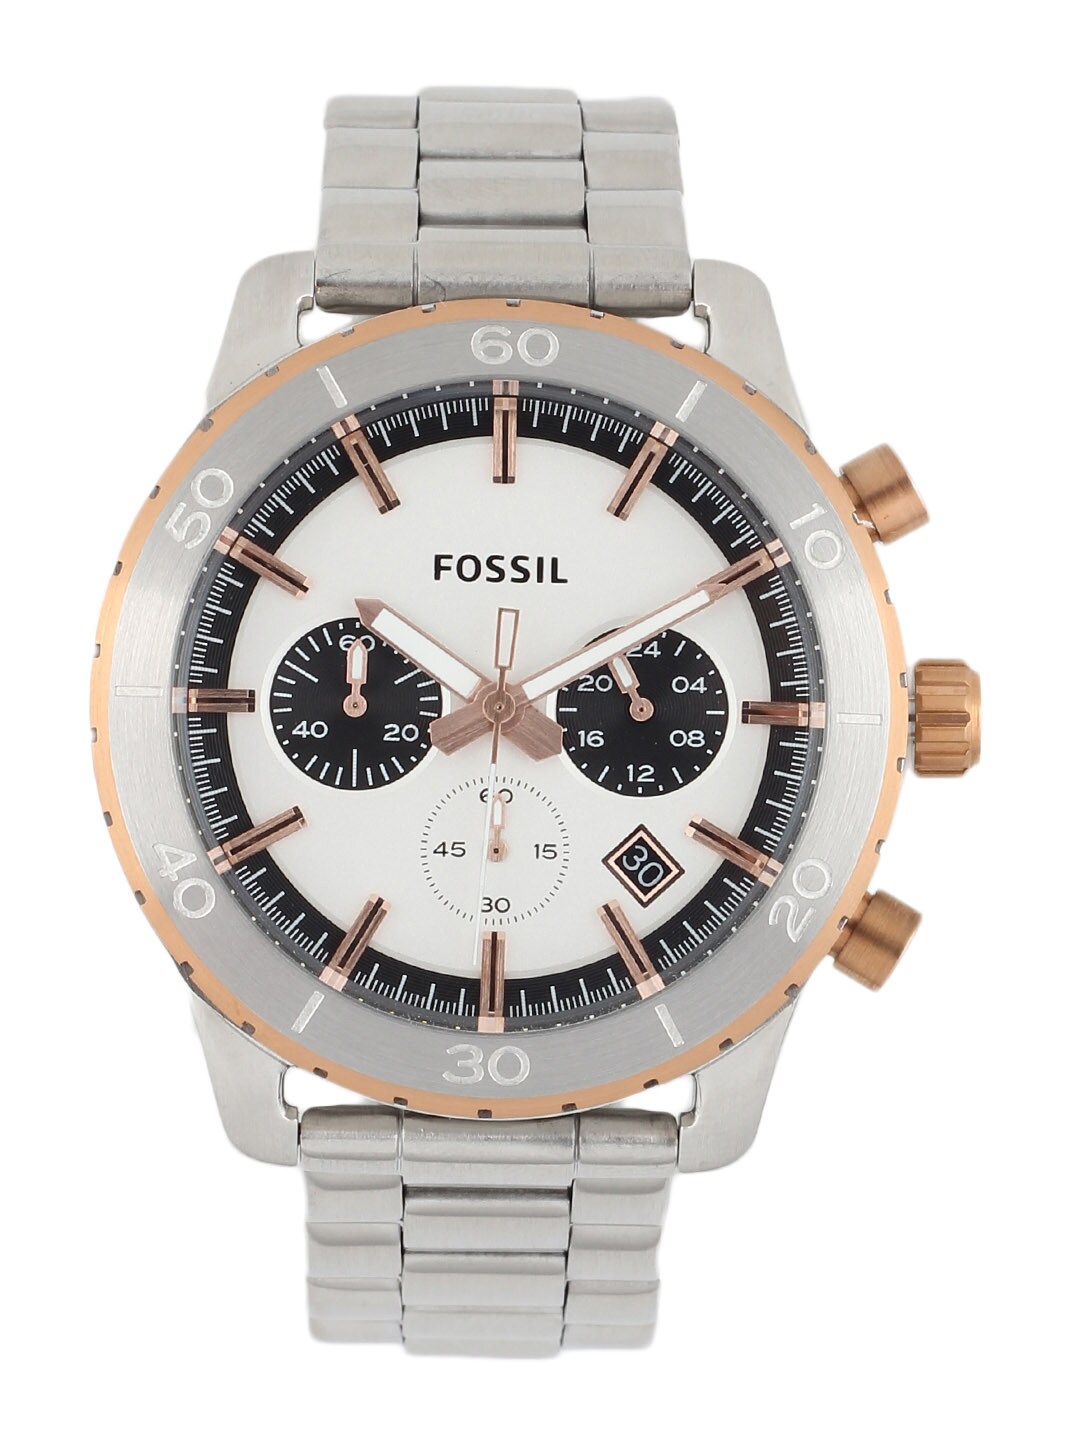 Fossil Men Silver Dial Analog Chronograph Watch CH2815